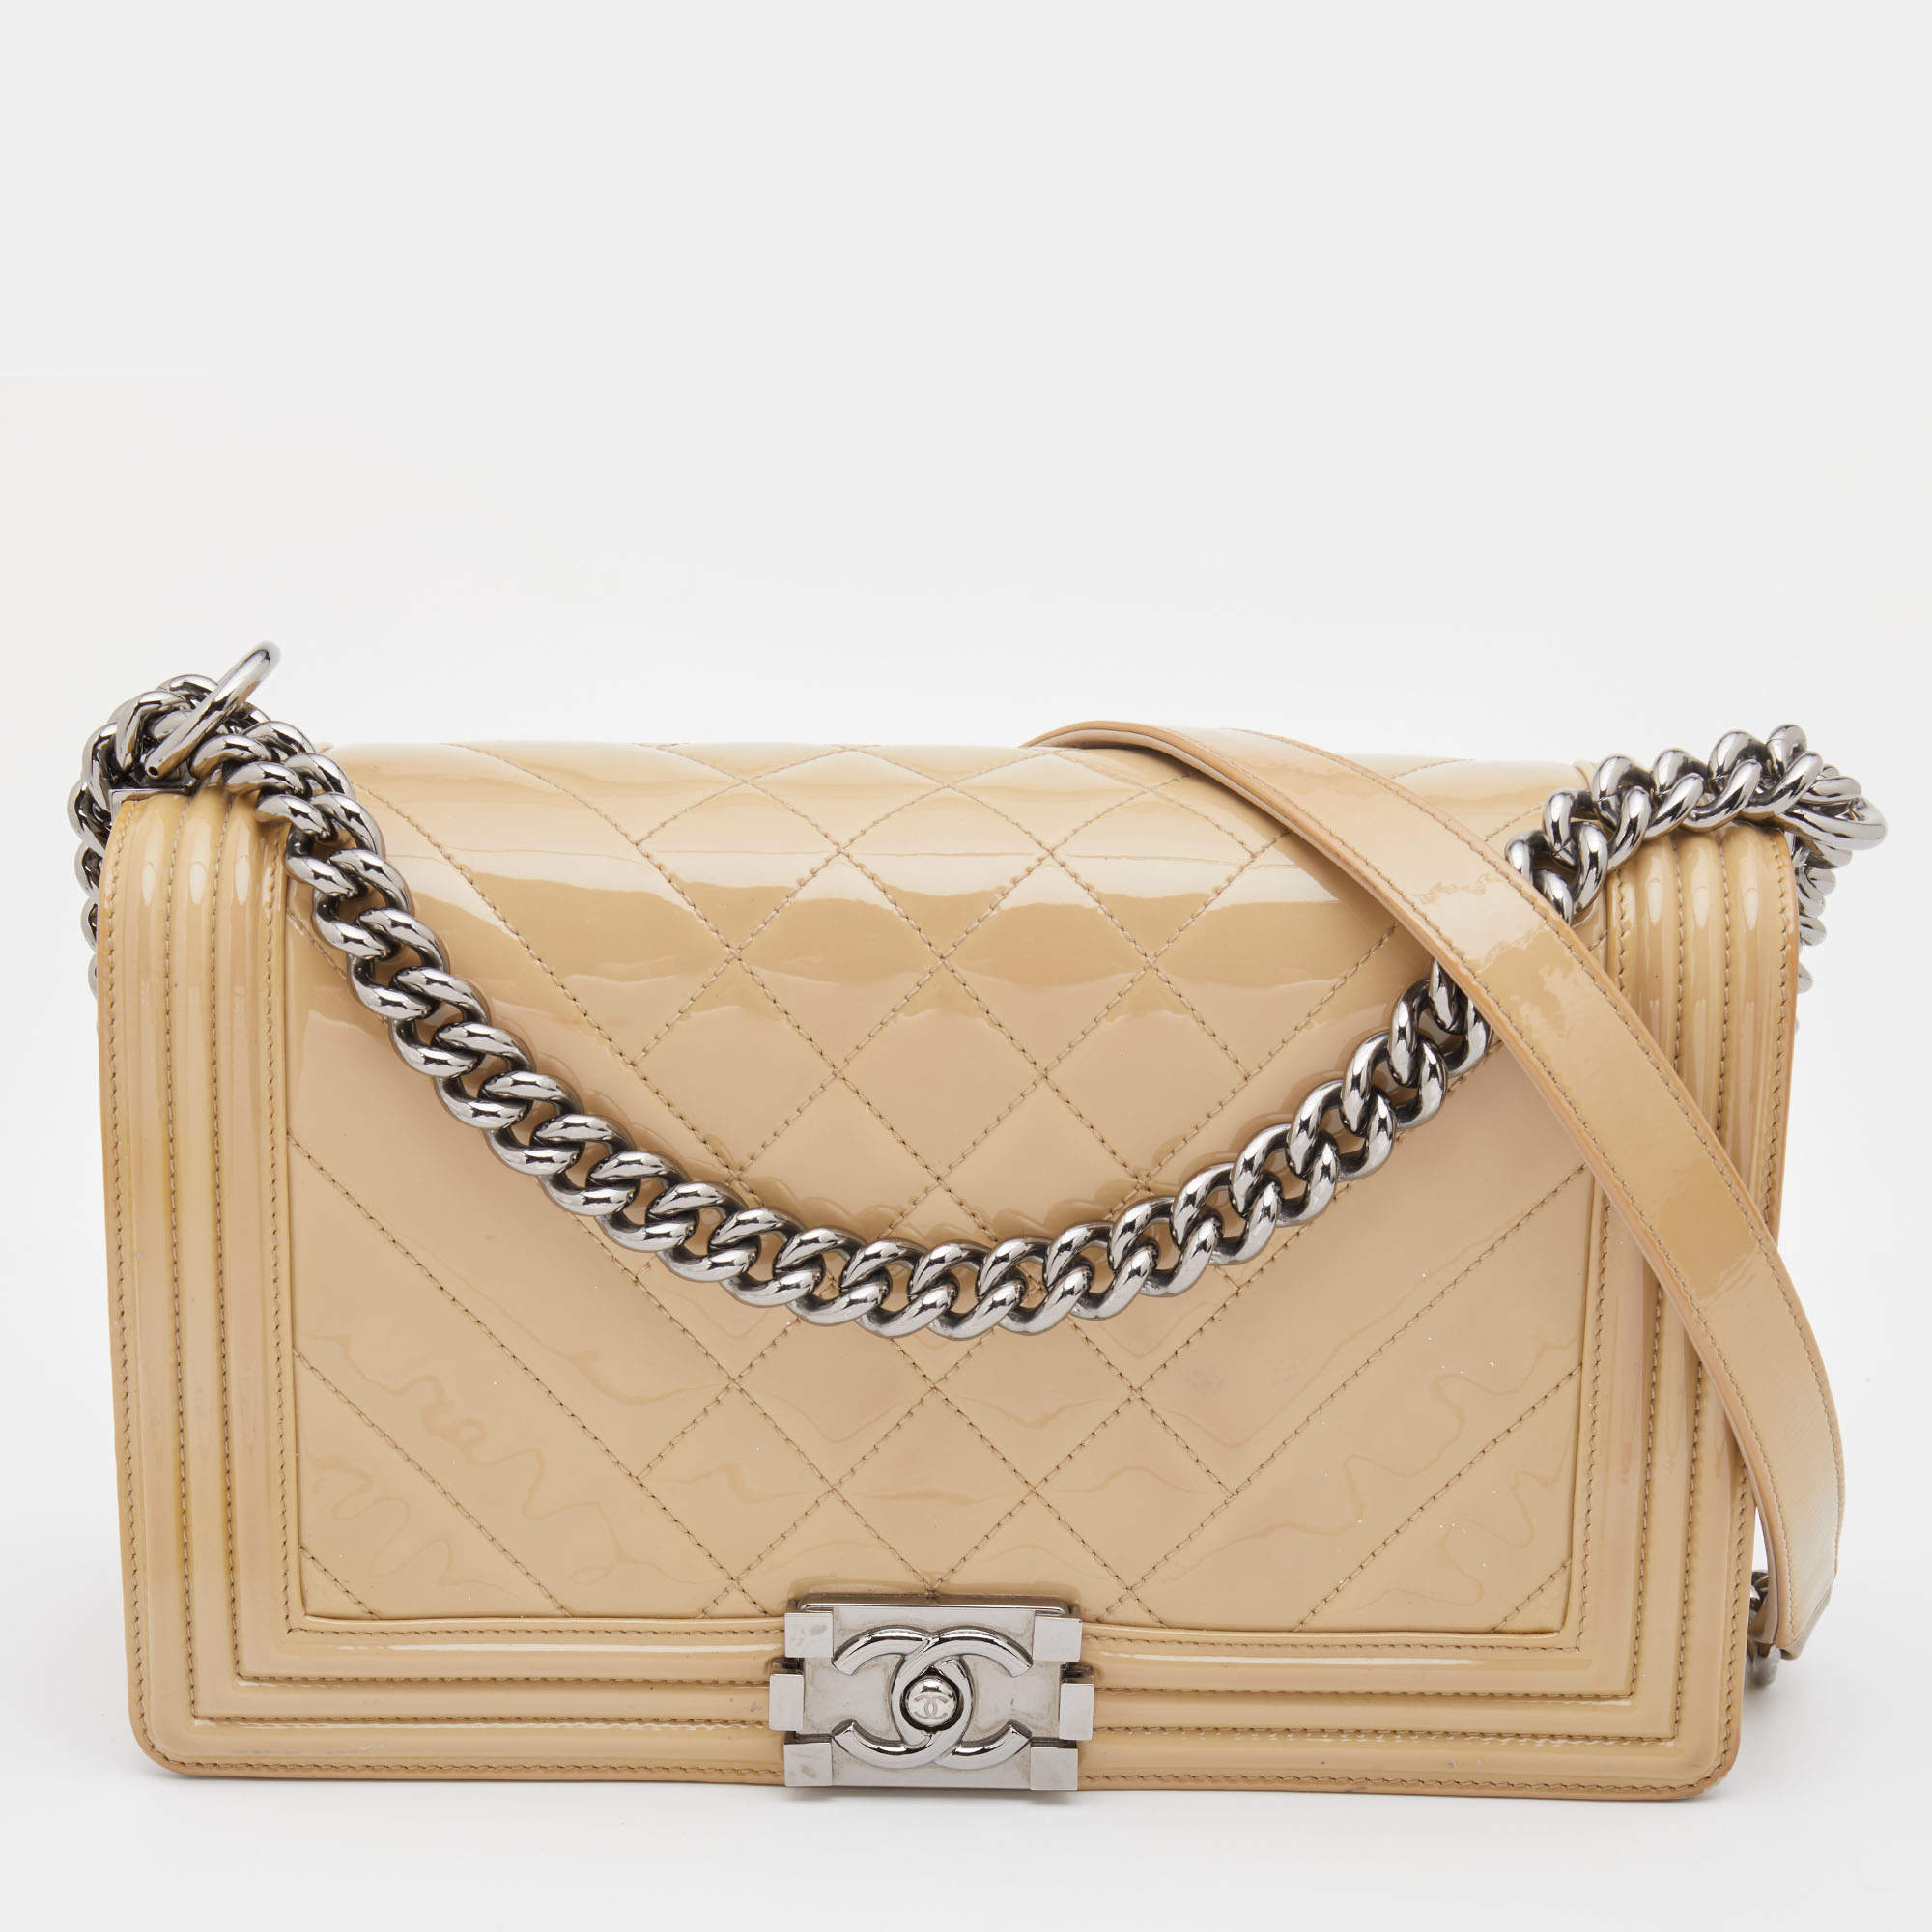 Shop online with Chanel 2014/2015 Beige Quilted Patent Medium Plexiglass Boy  Bag With Strap Chanel . Today you can browse the latest fashions and brand  names online